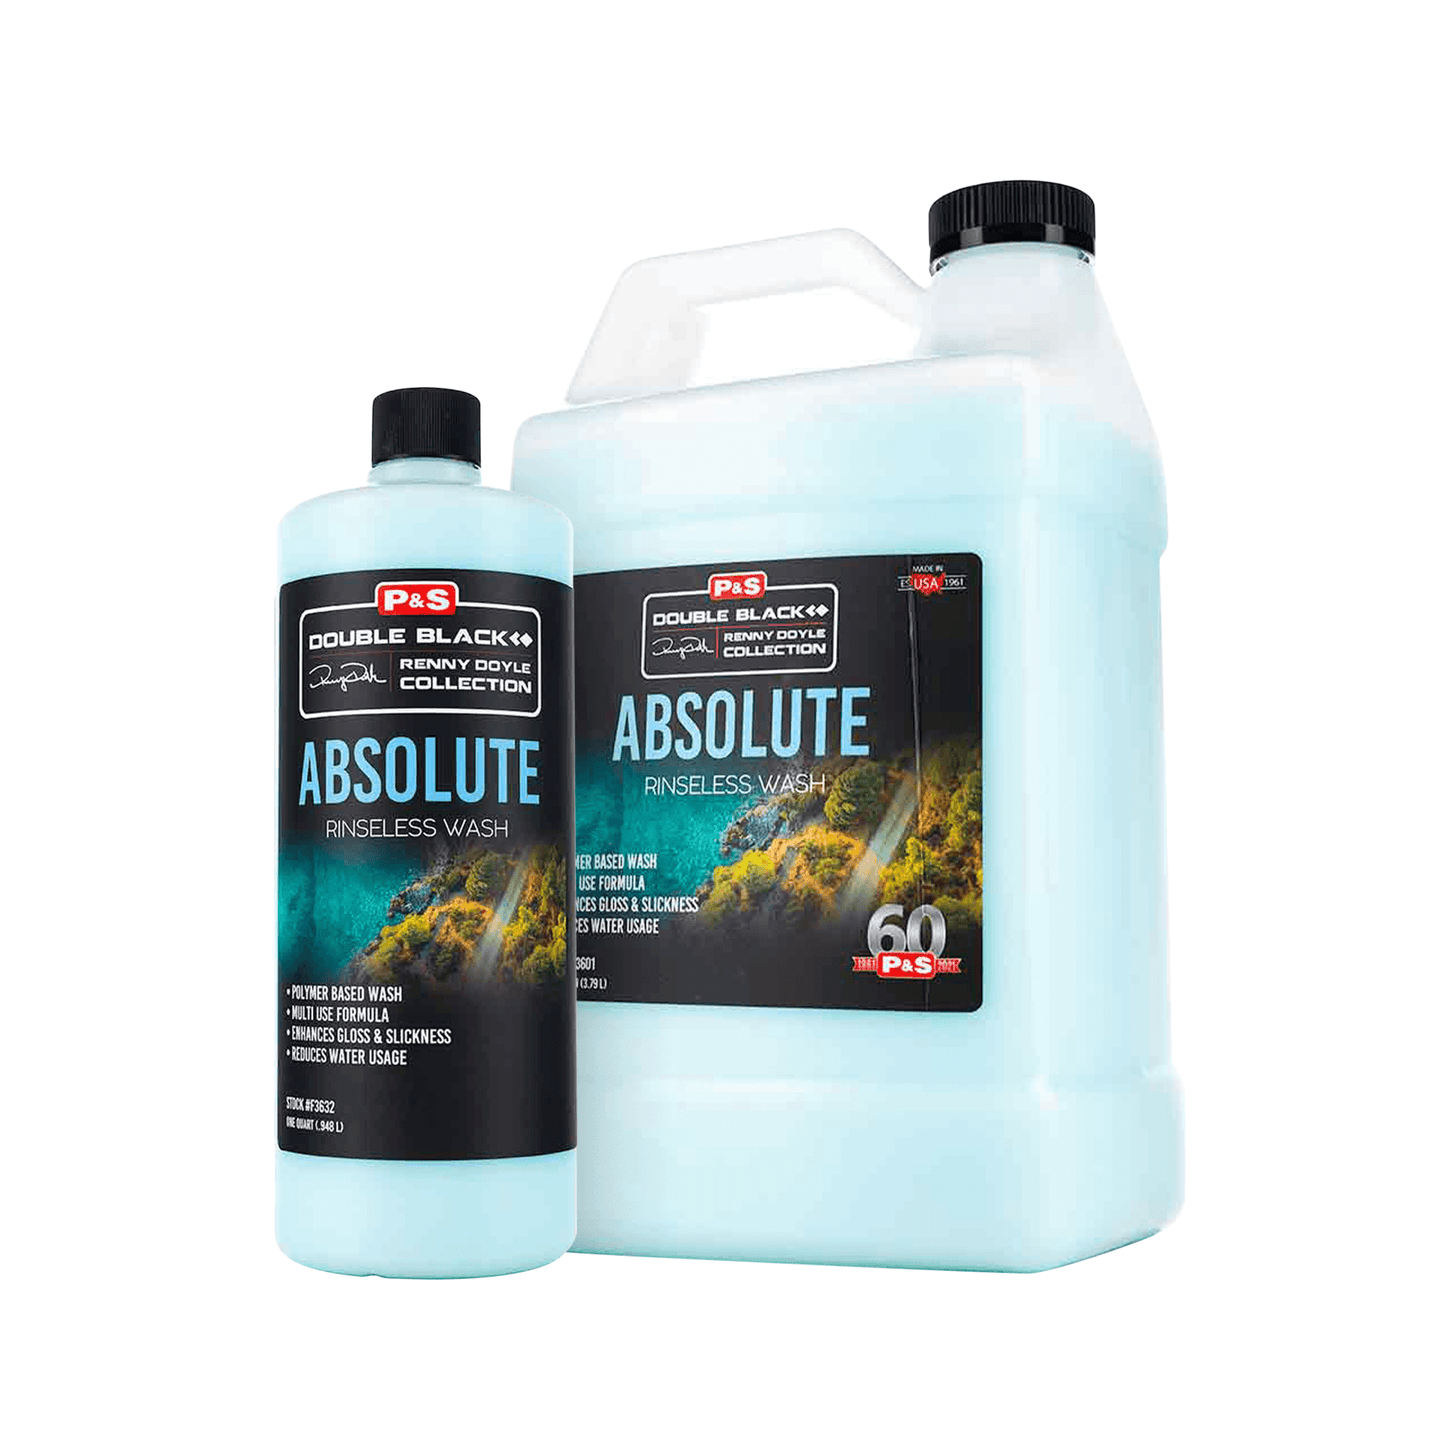 P&S Detail ABSOLUTE Rinseless Wash - in Stock